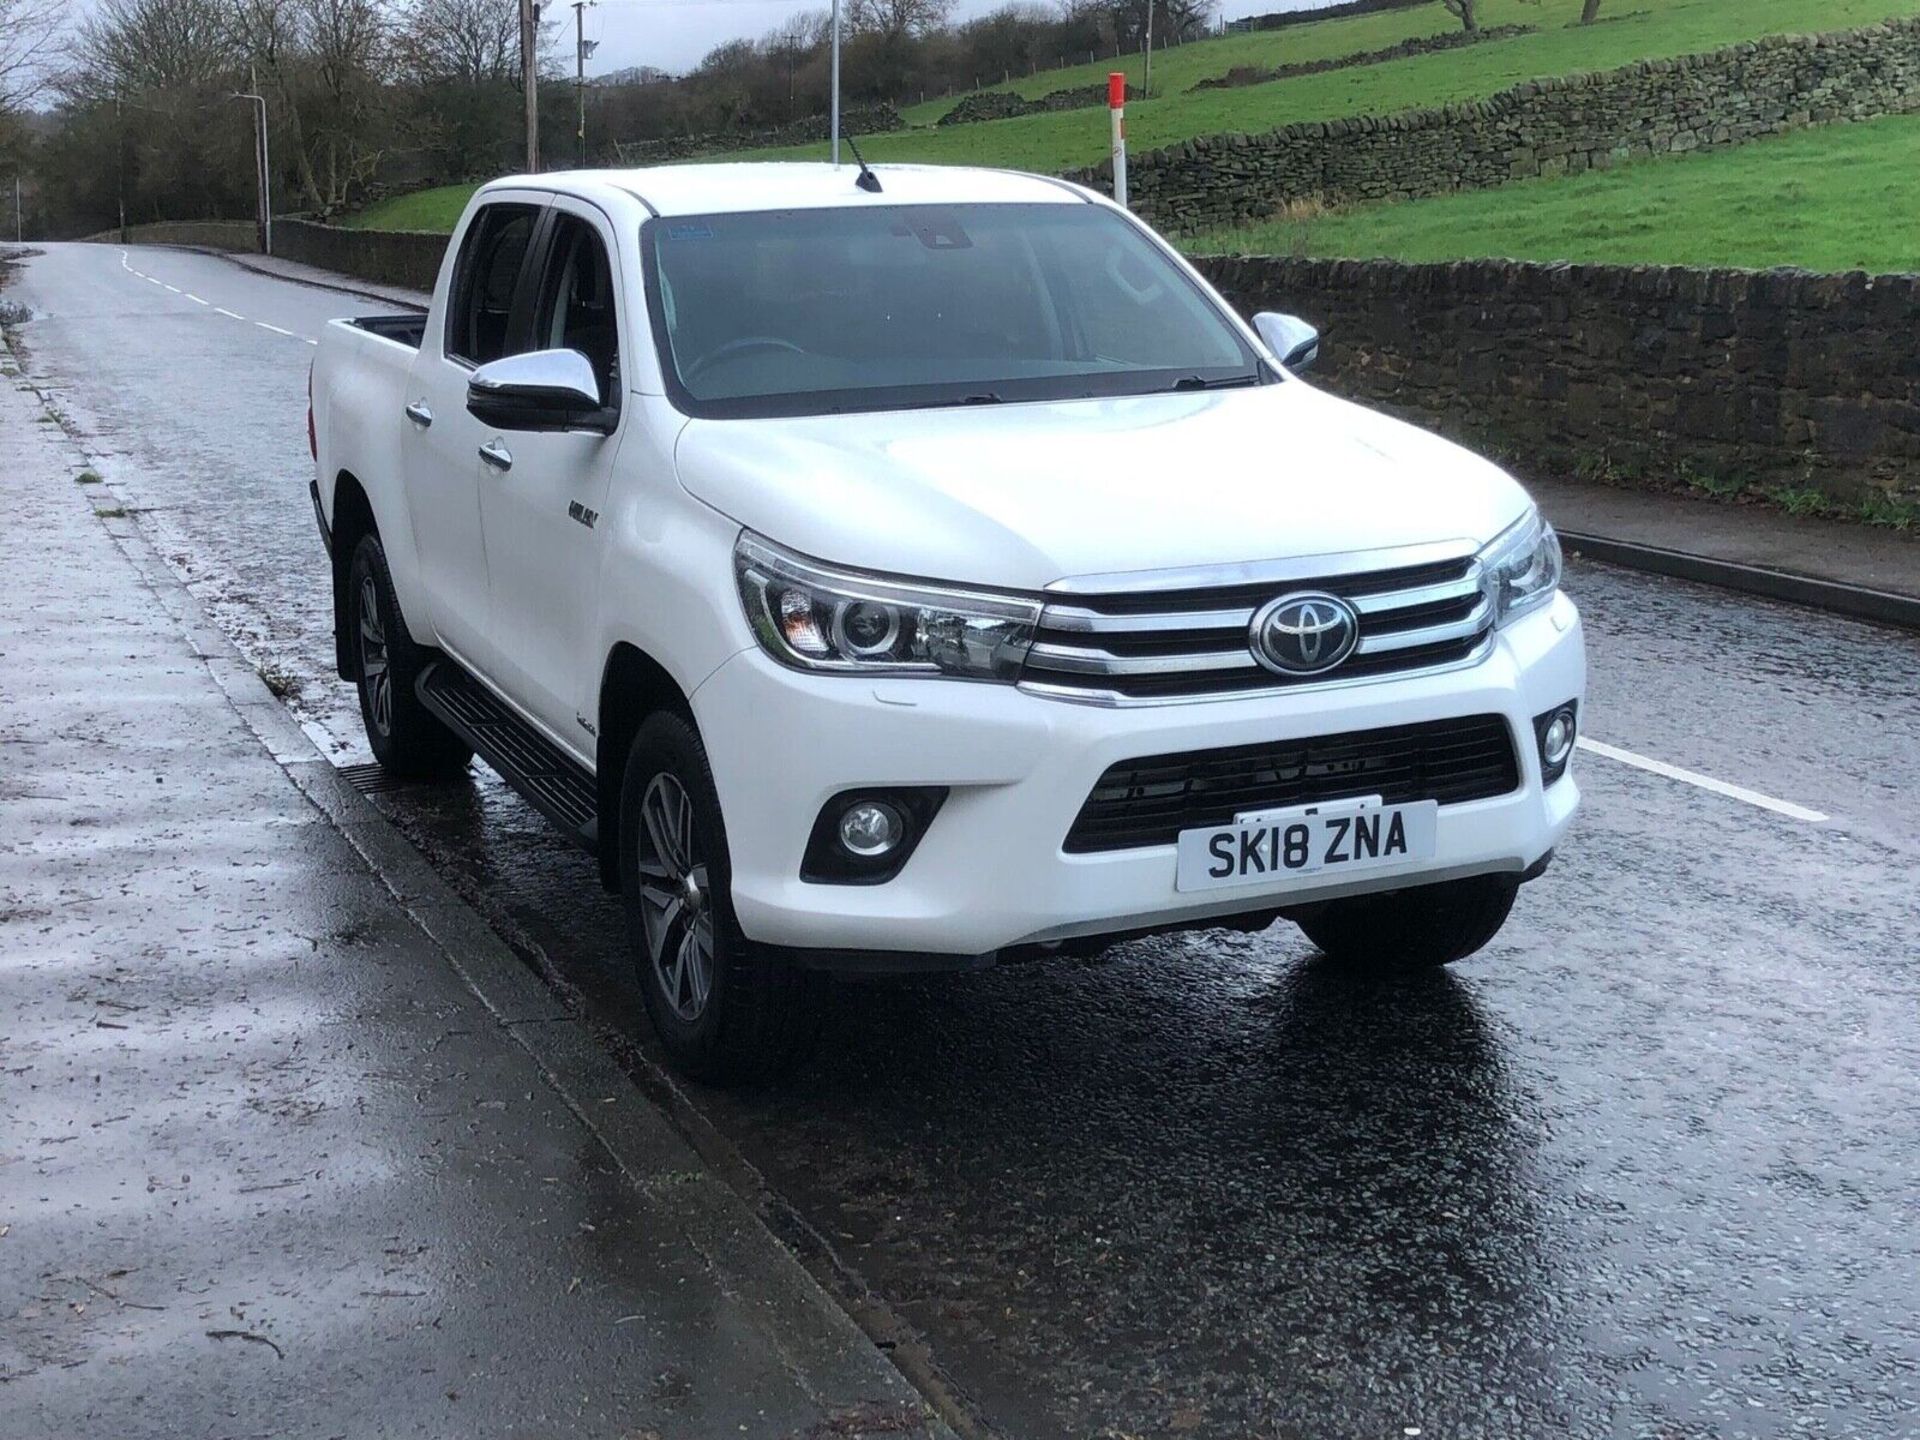 2018/18 TOYOTA HILUX 2.4 INVINCIBLE DOUBLE CAB - OFF-ROAD ADVENTURE READY>>--NO VAT ON HAMMER--<<